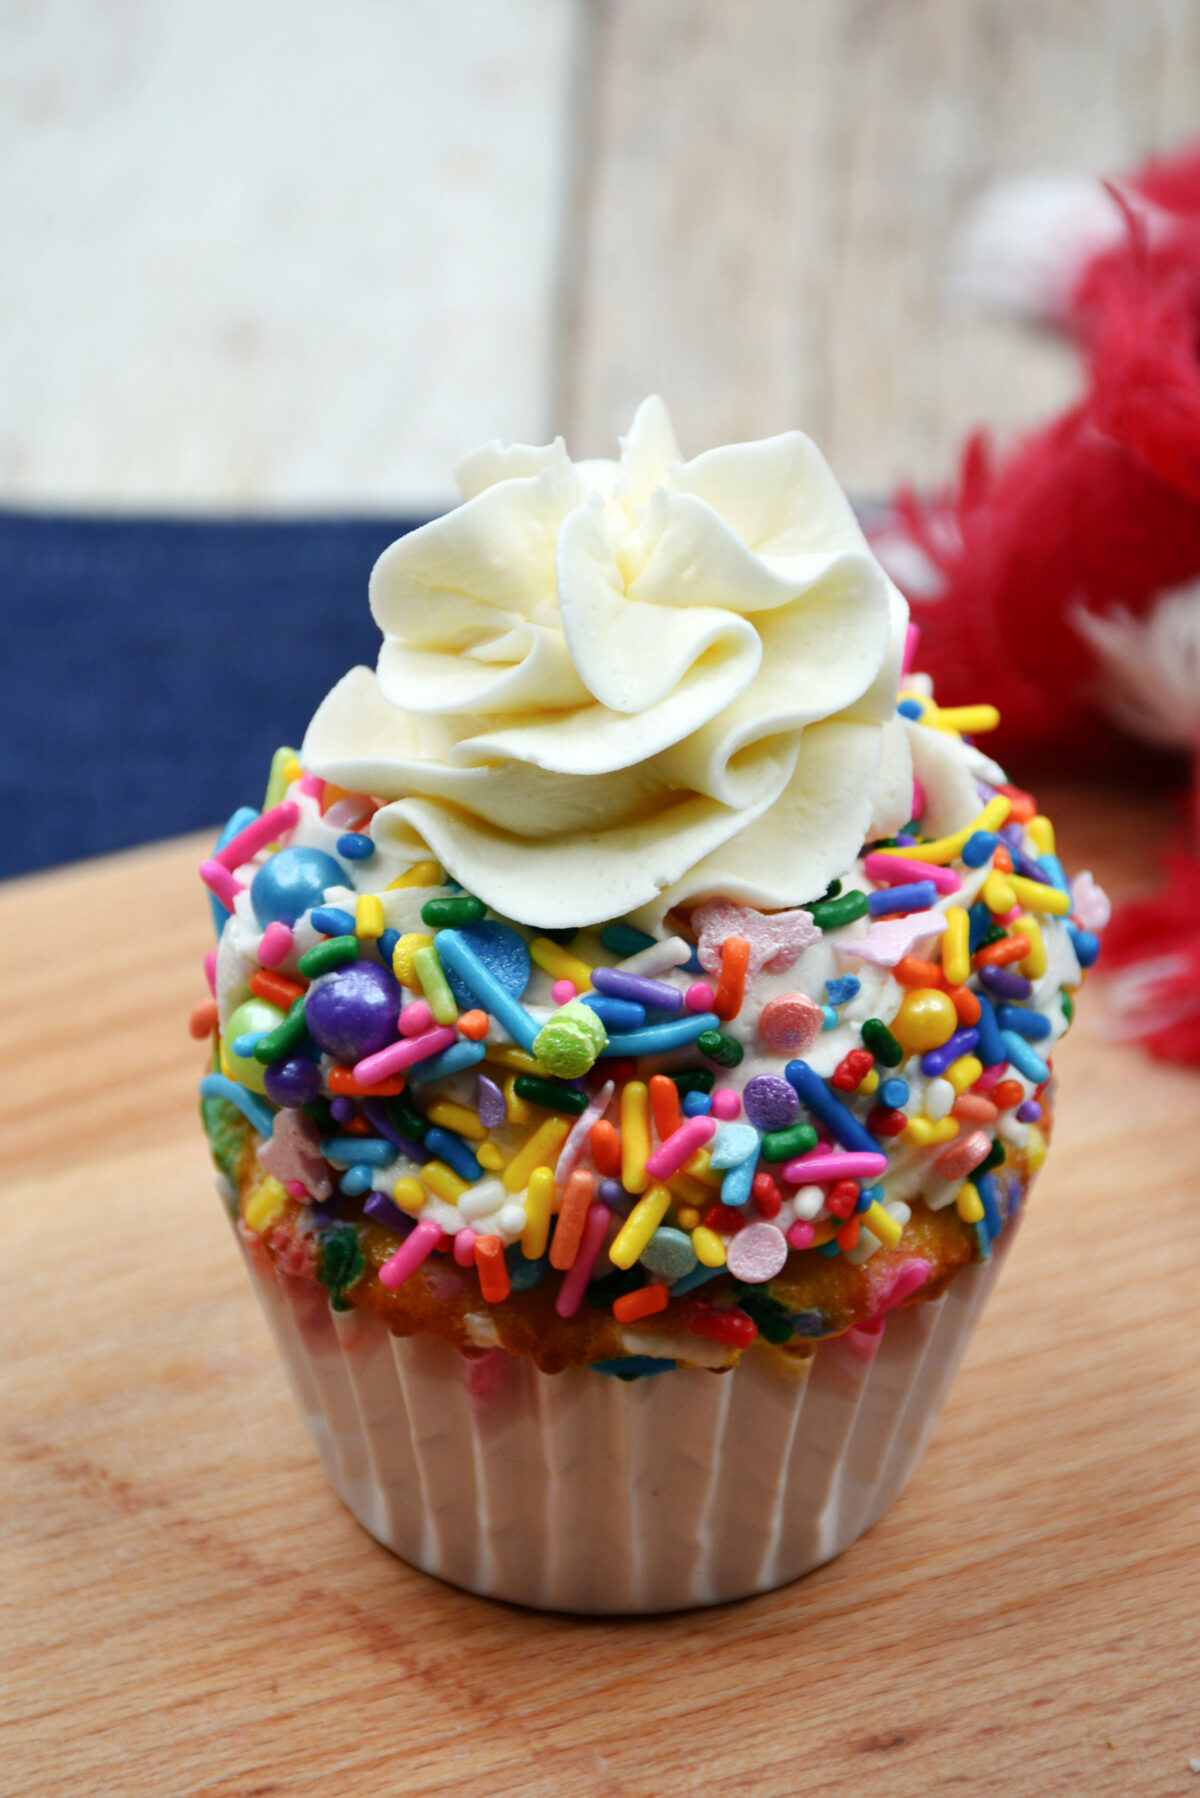 Dollop of frosting on top of funfetti cupcake.